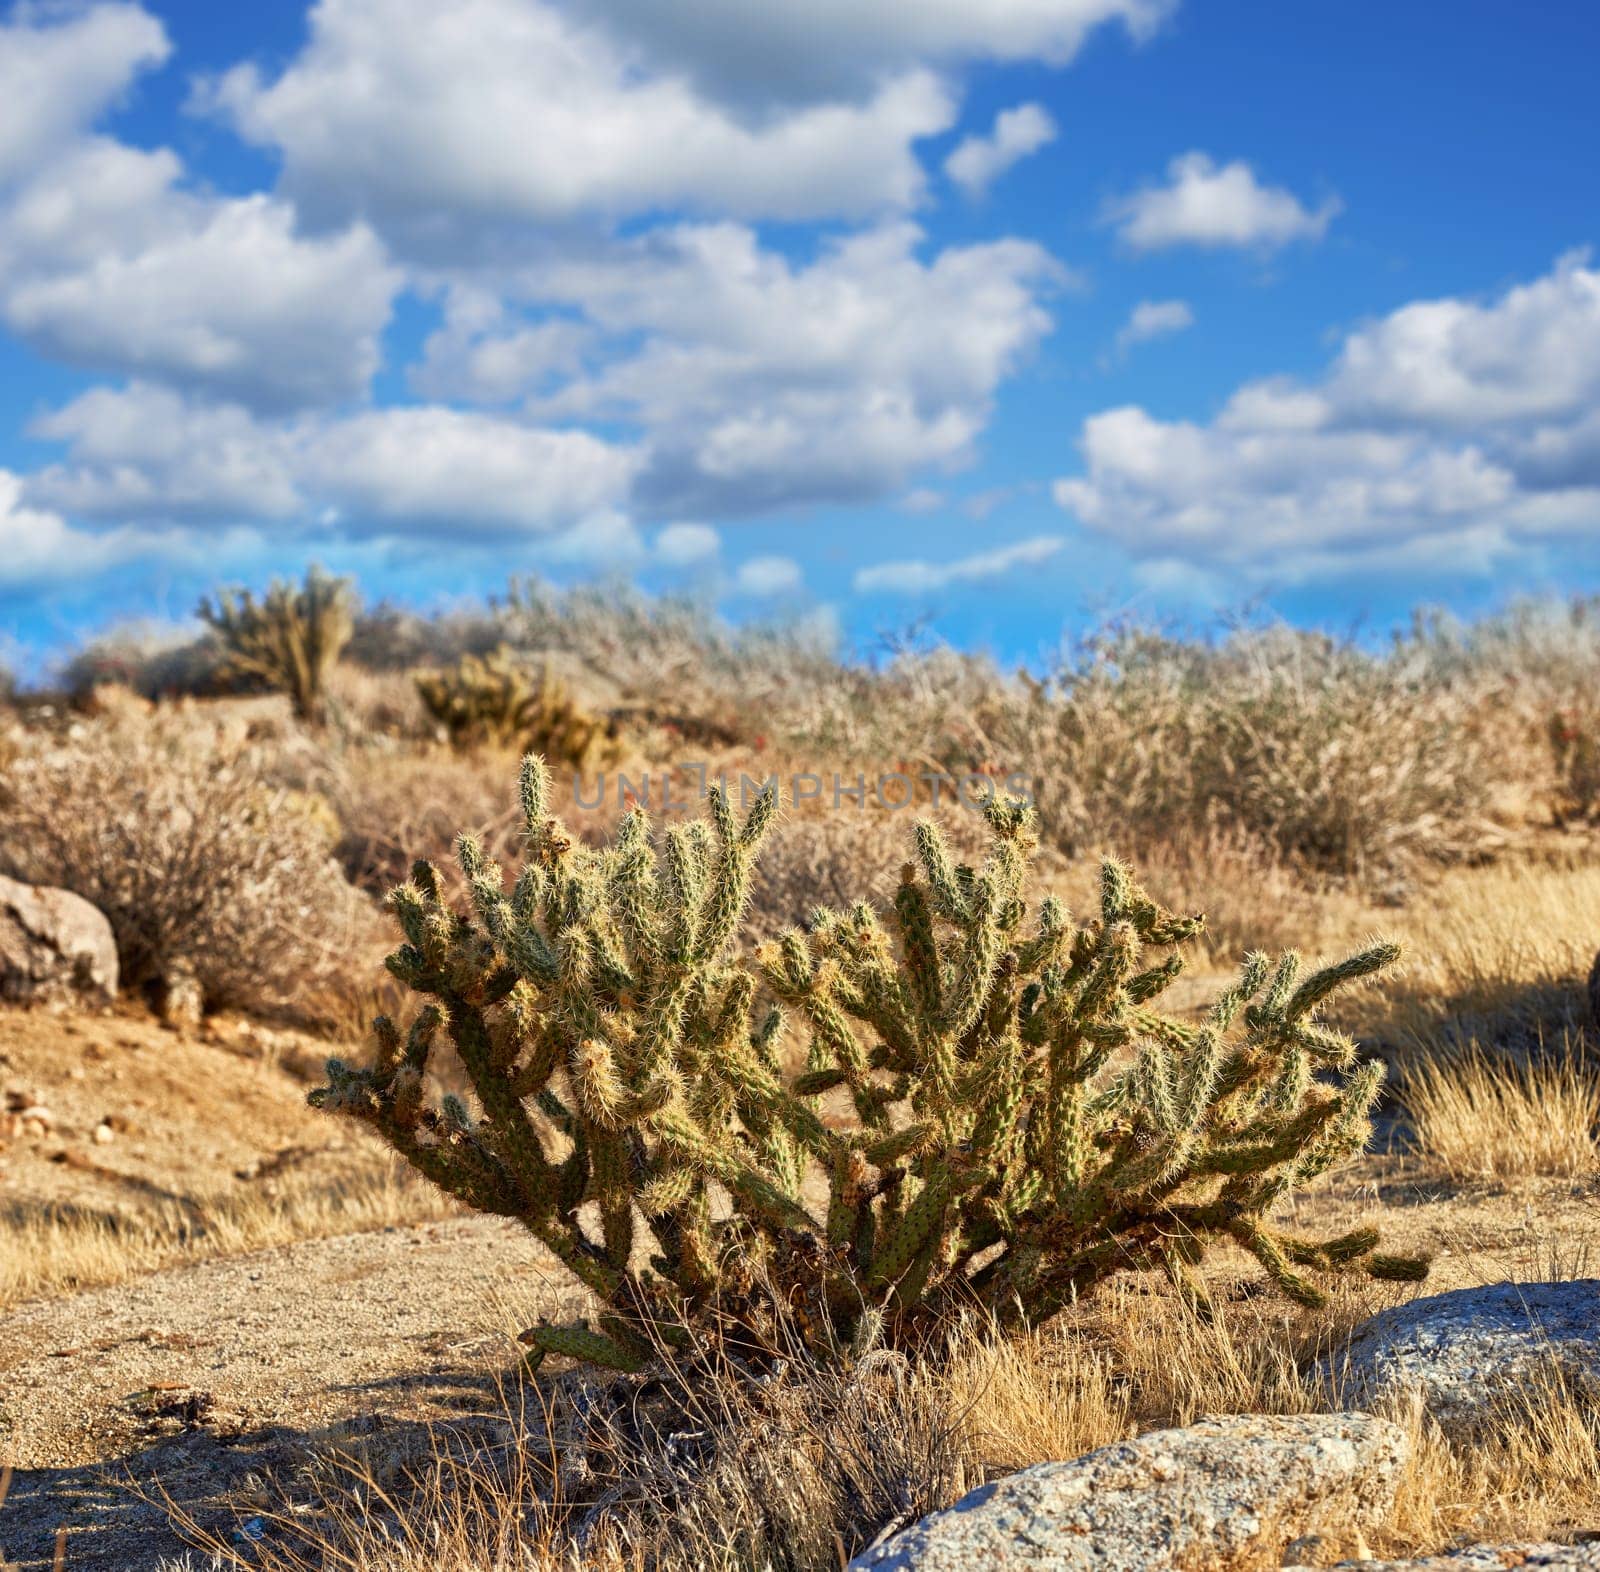 Desert, cactus and plant in bush landscape outdoor in nature of California, USA. Succulent, environment and growth of indigenous shrub in summer with biodiversity in dry land with grass and blue sky.